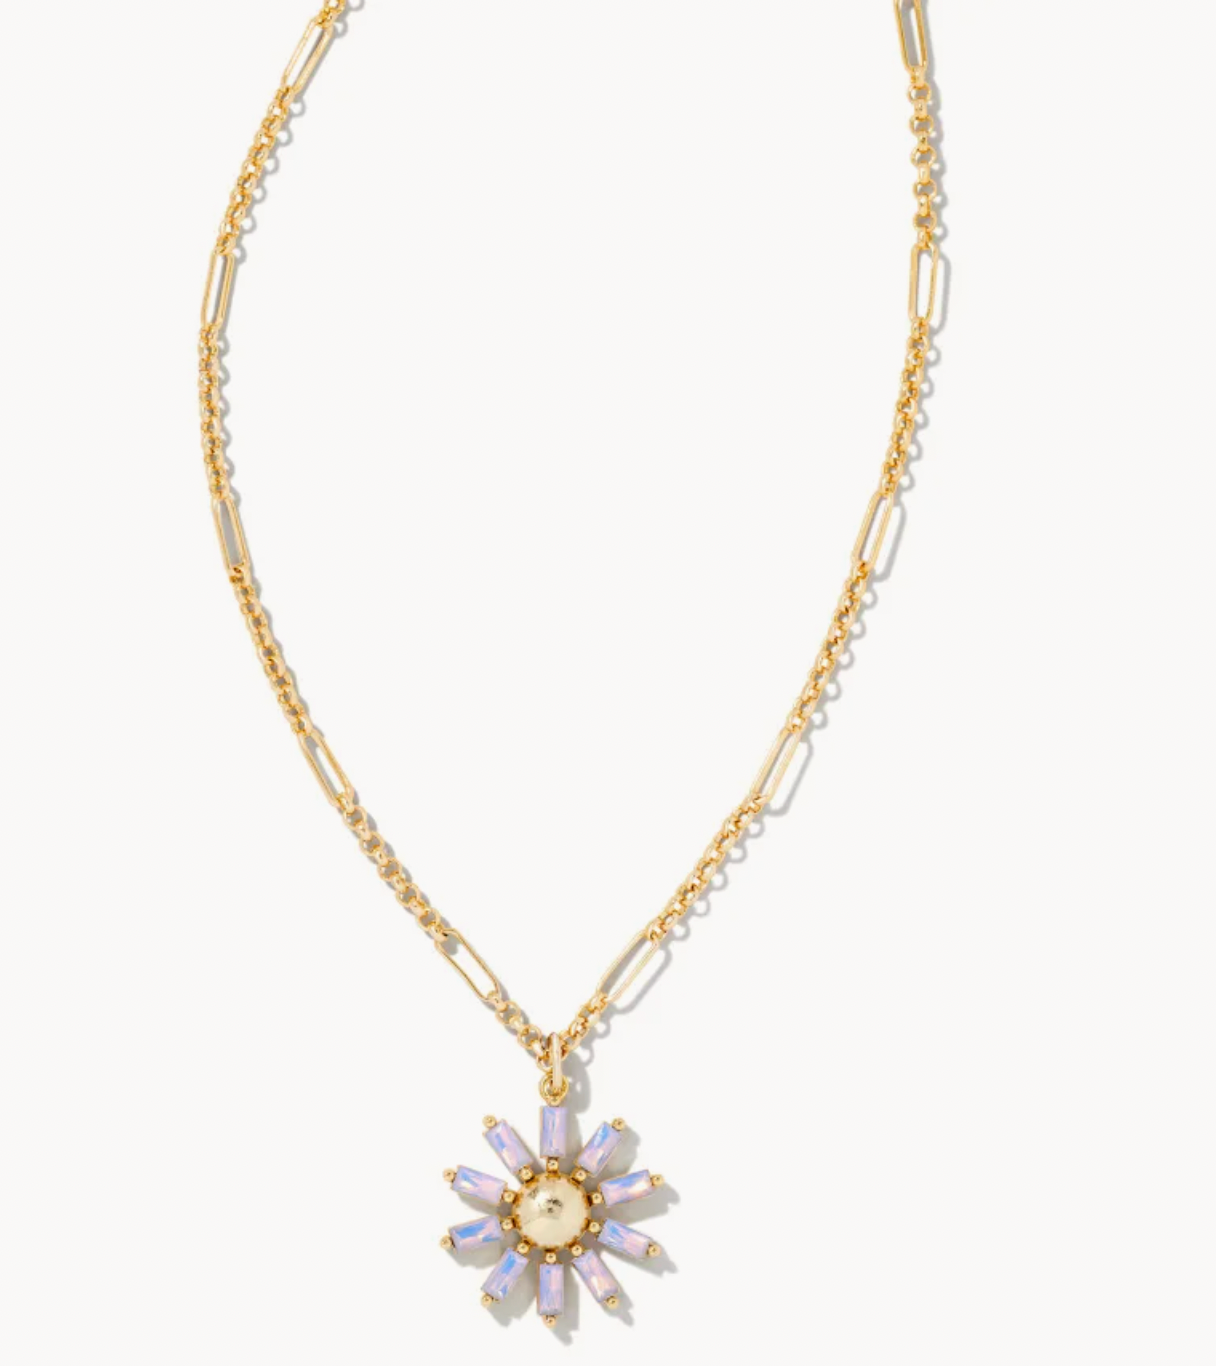 Kendra Scott Madison Daisy Gold Necklace in Pink Opal Crystal